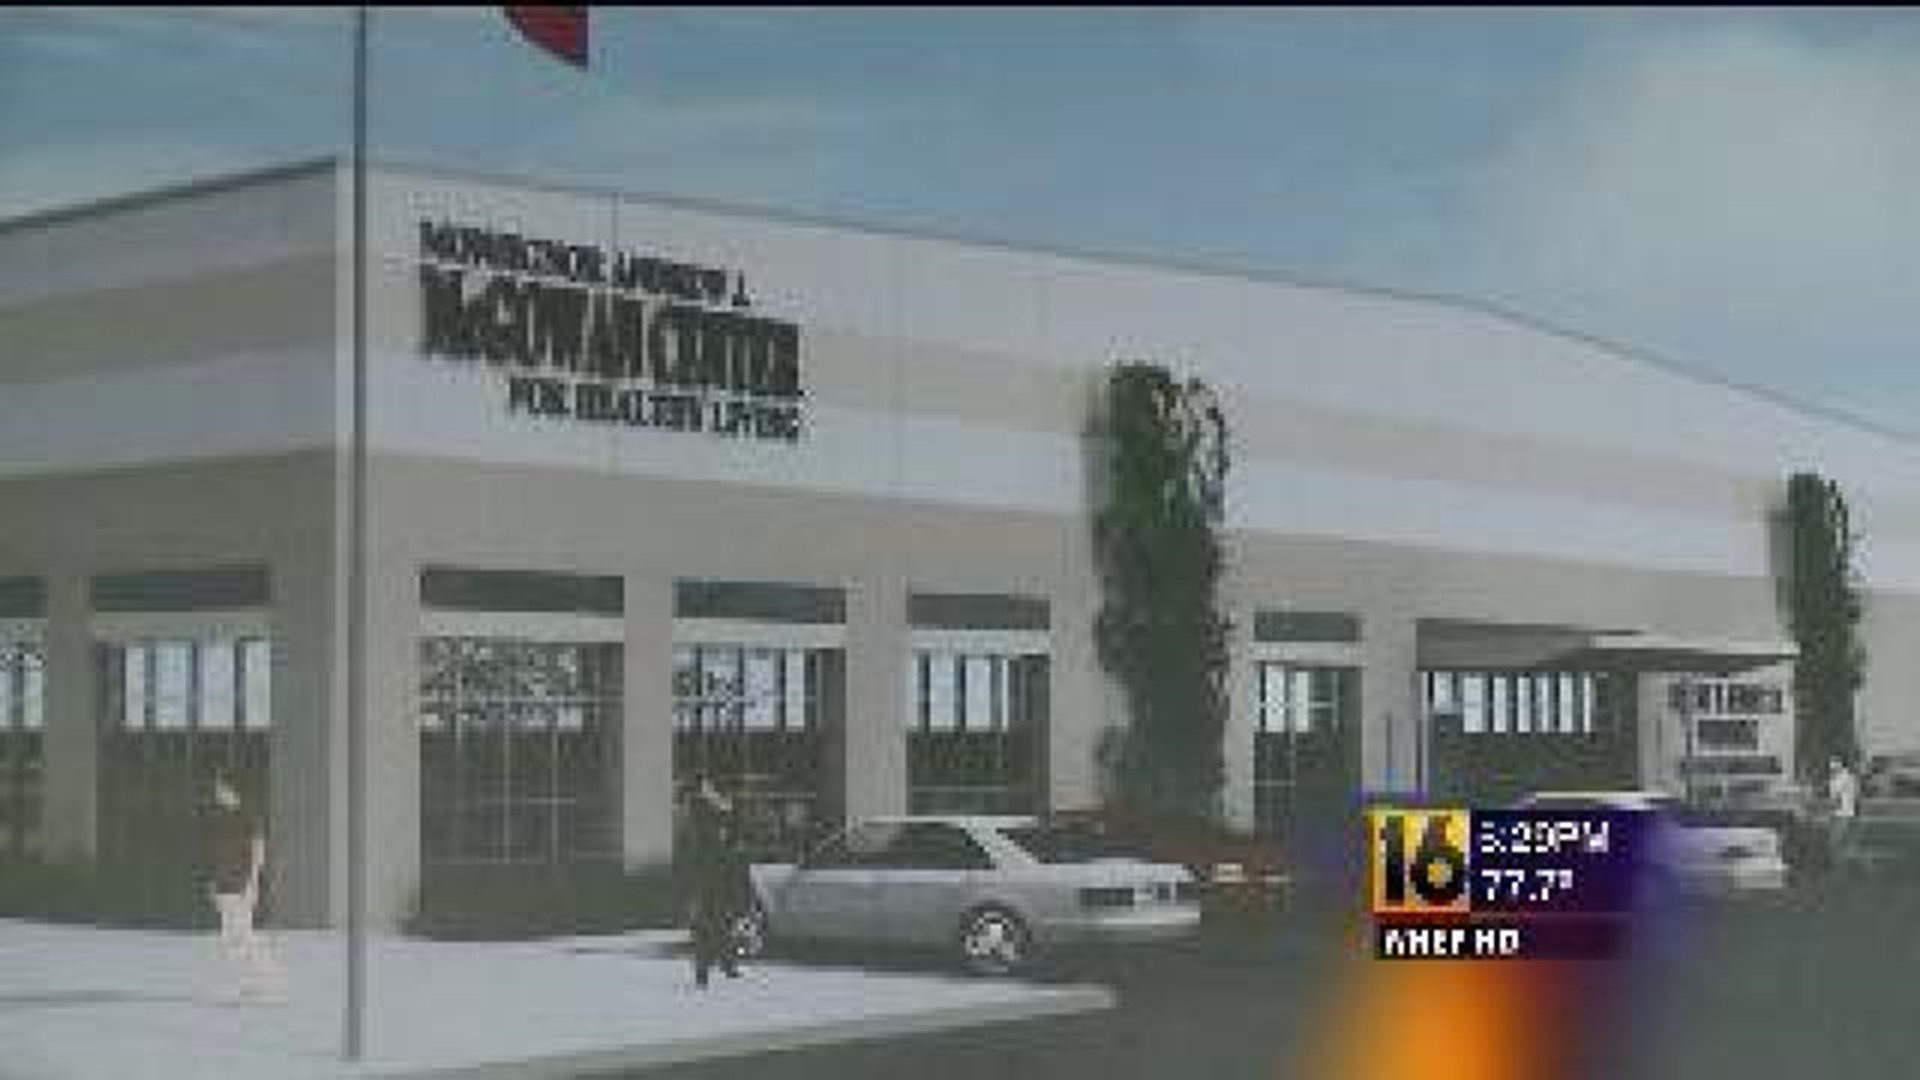 New Food Bank To Be Built in Luzerne County